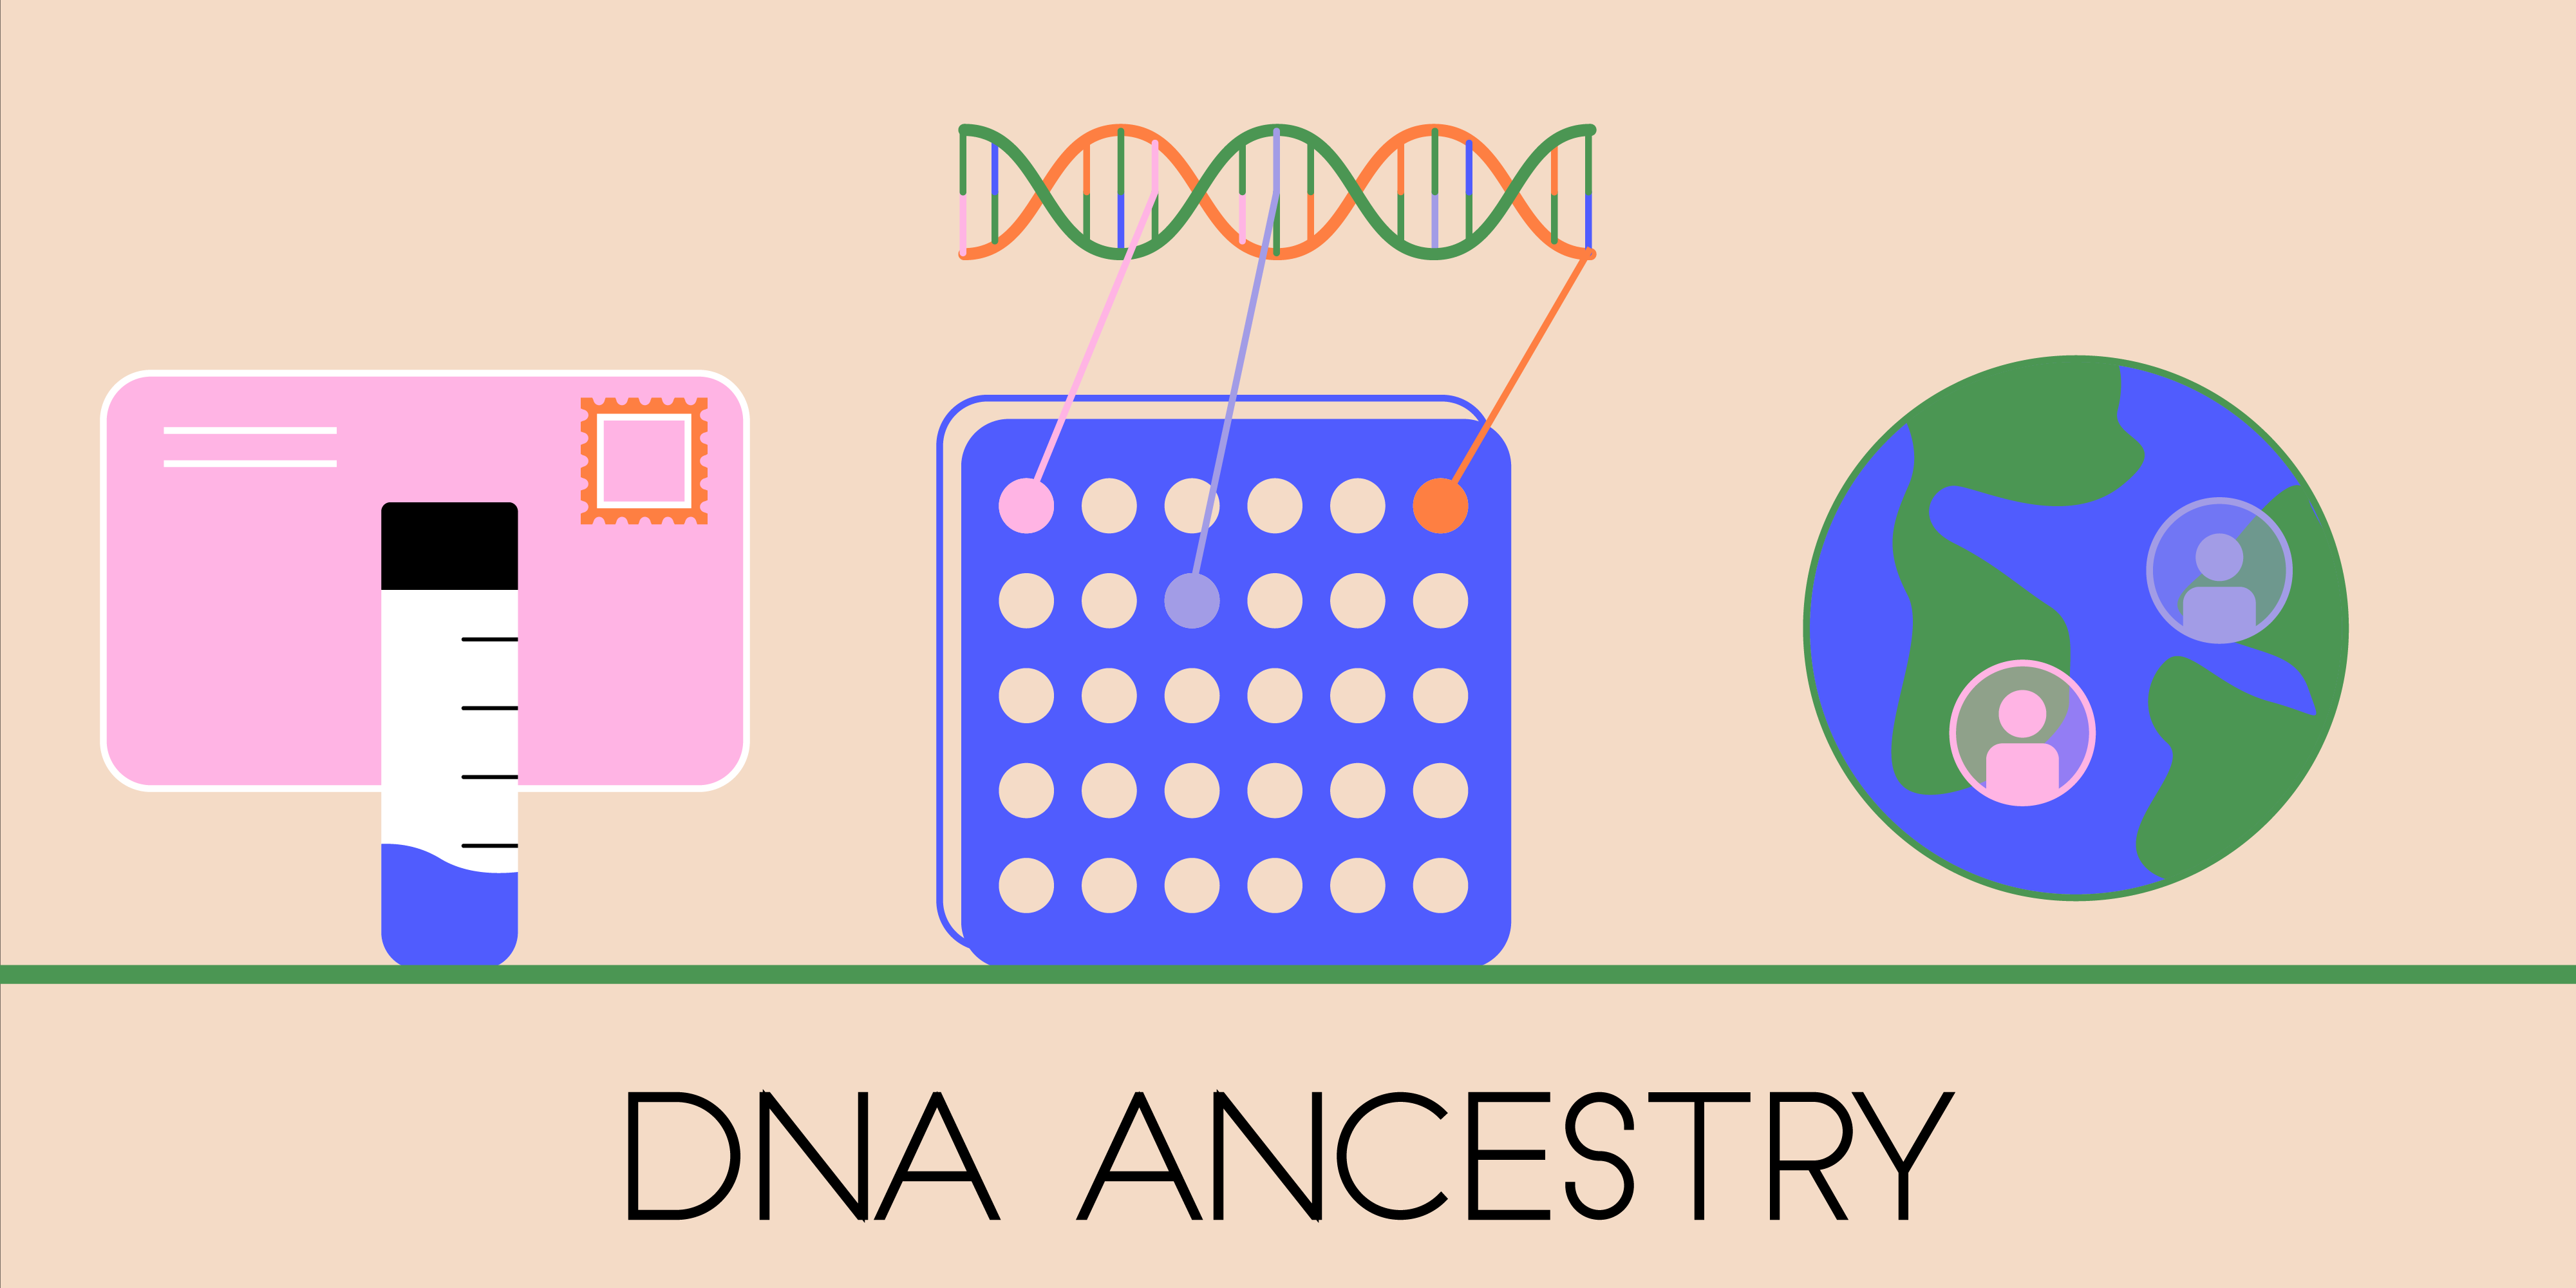 Icons showing a test tube and an envelope; a grid and a DNA helix; and a globe with person markers appear over the words "DNA ANCESTRY."